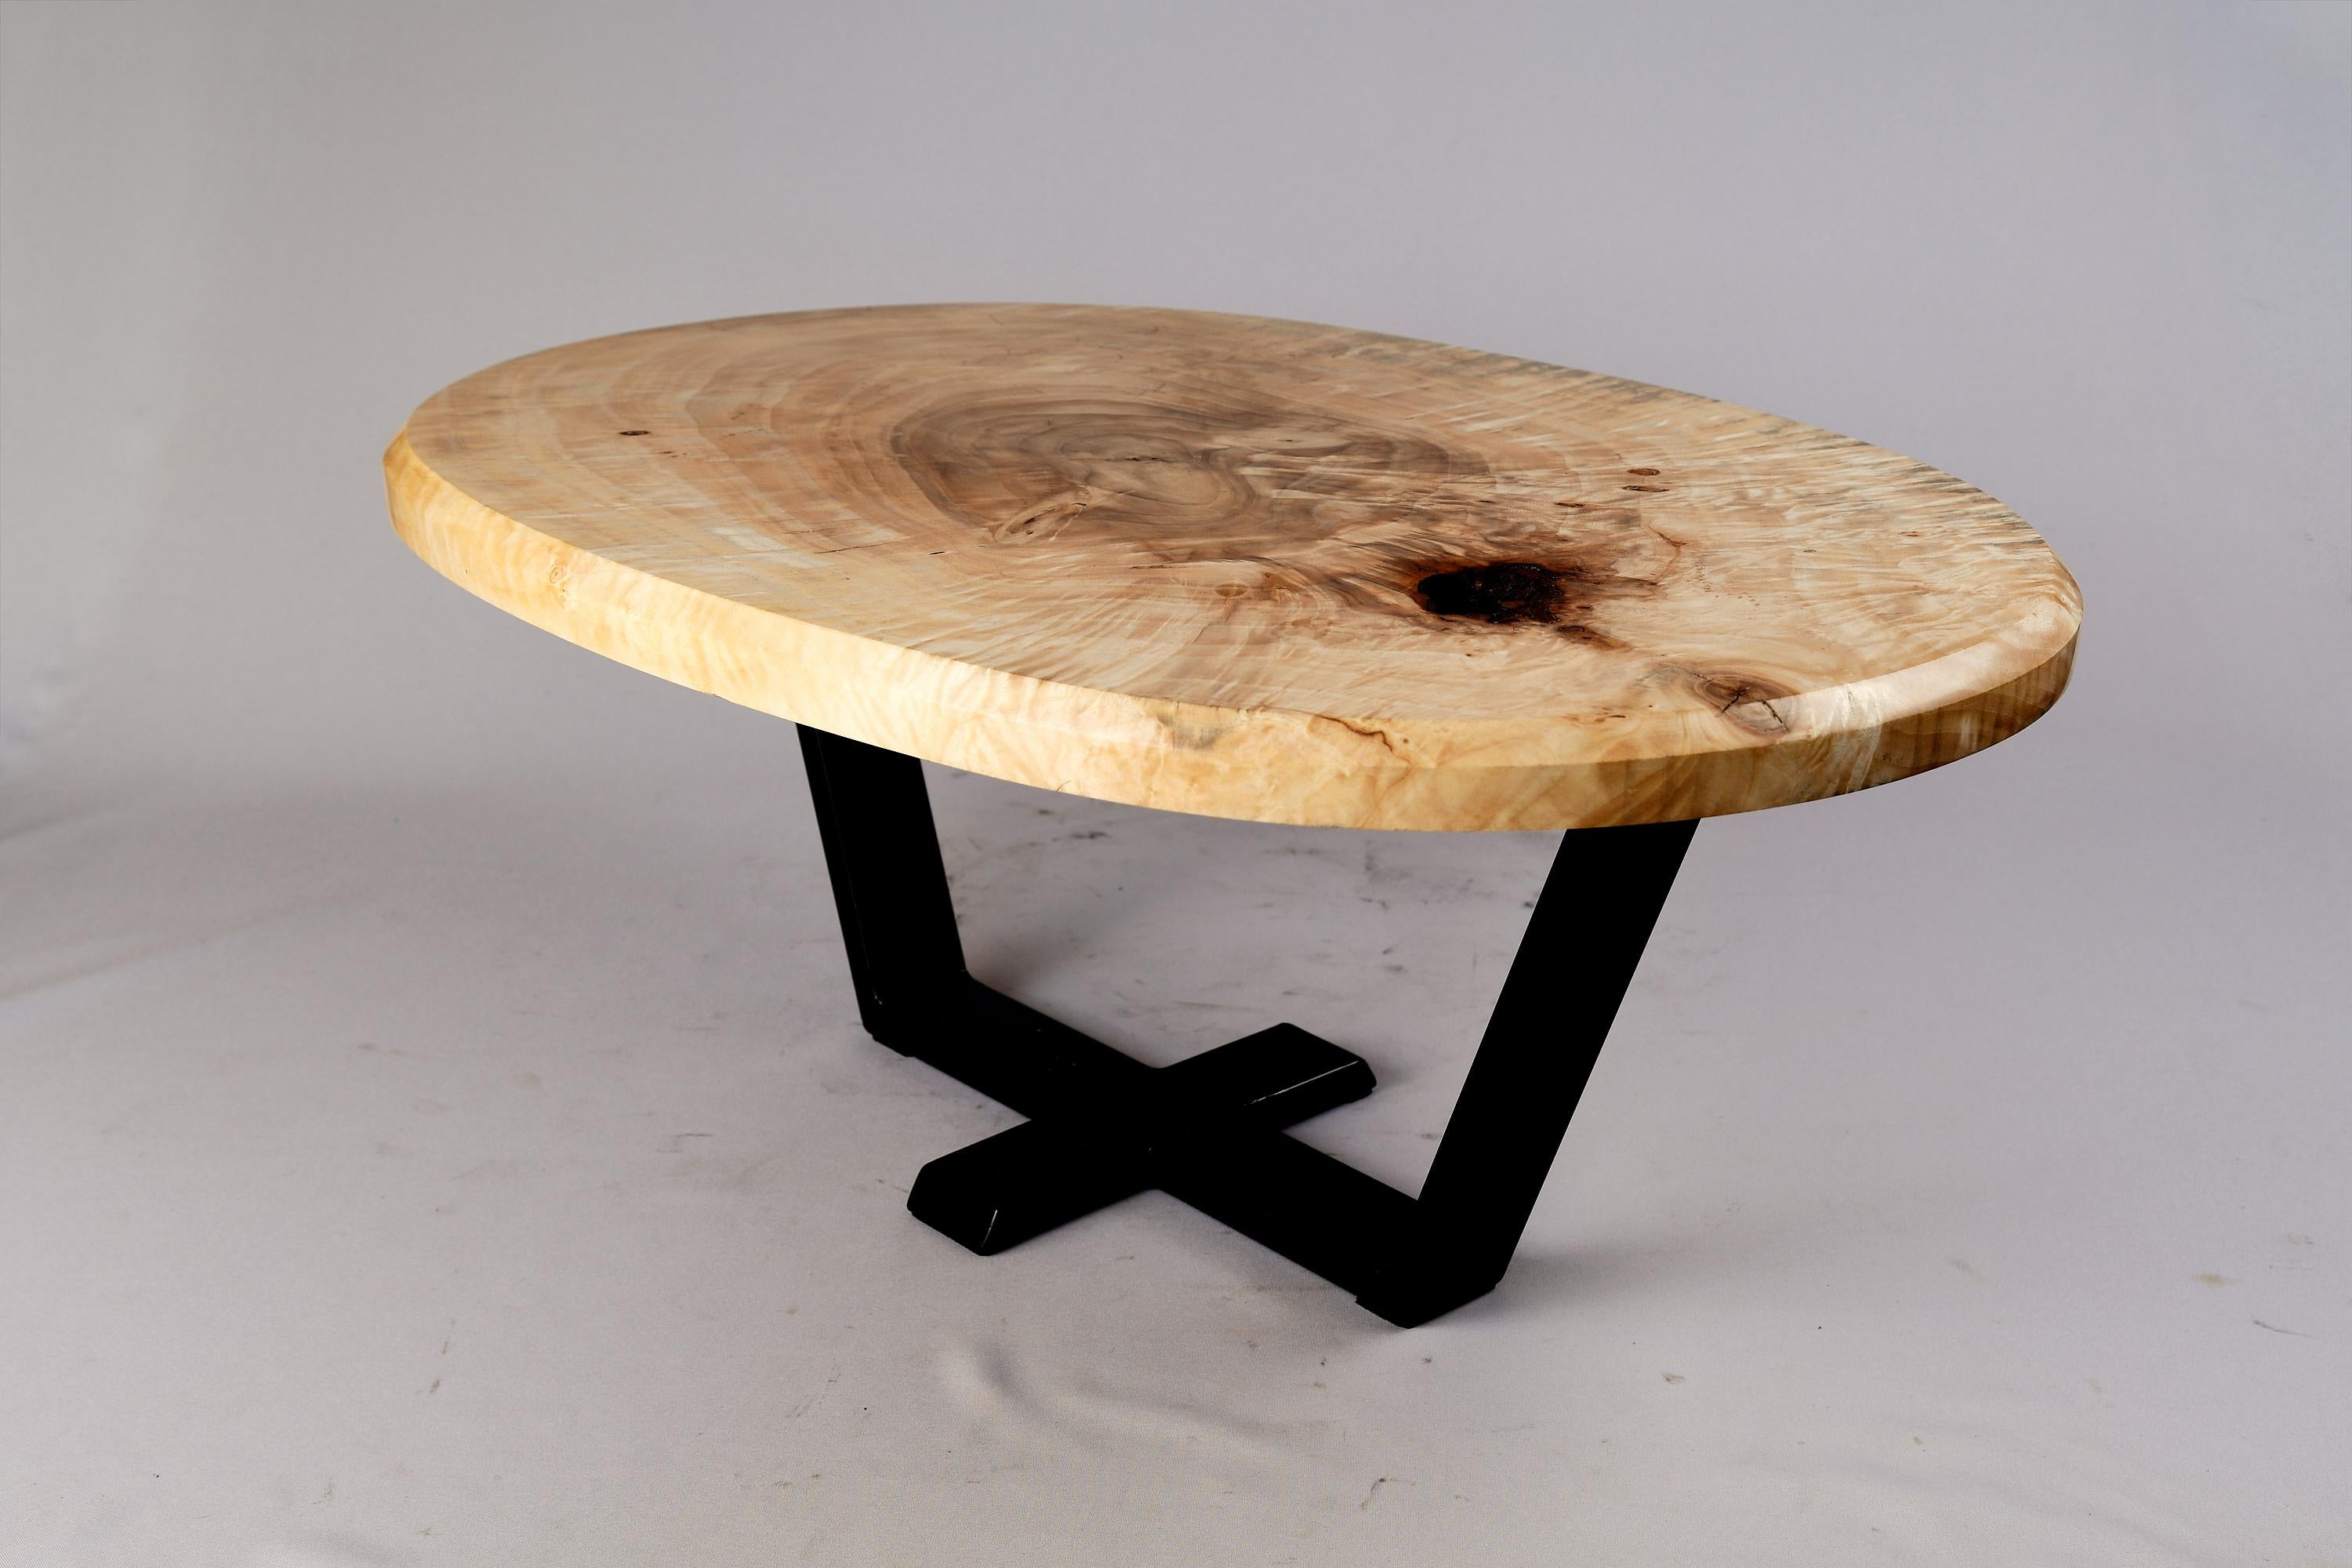 Hand-Crafted Original Contemporary Design, Burnt Oak with Steel, Unique Side Table, Logniture For Sale